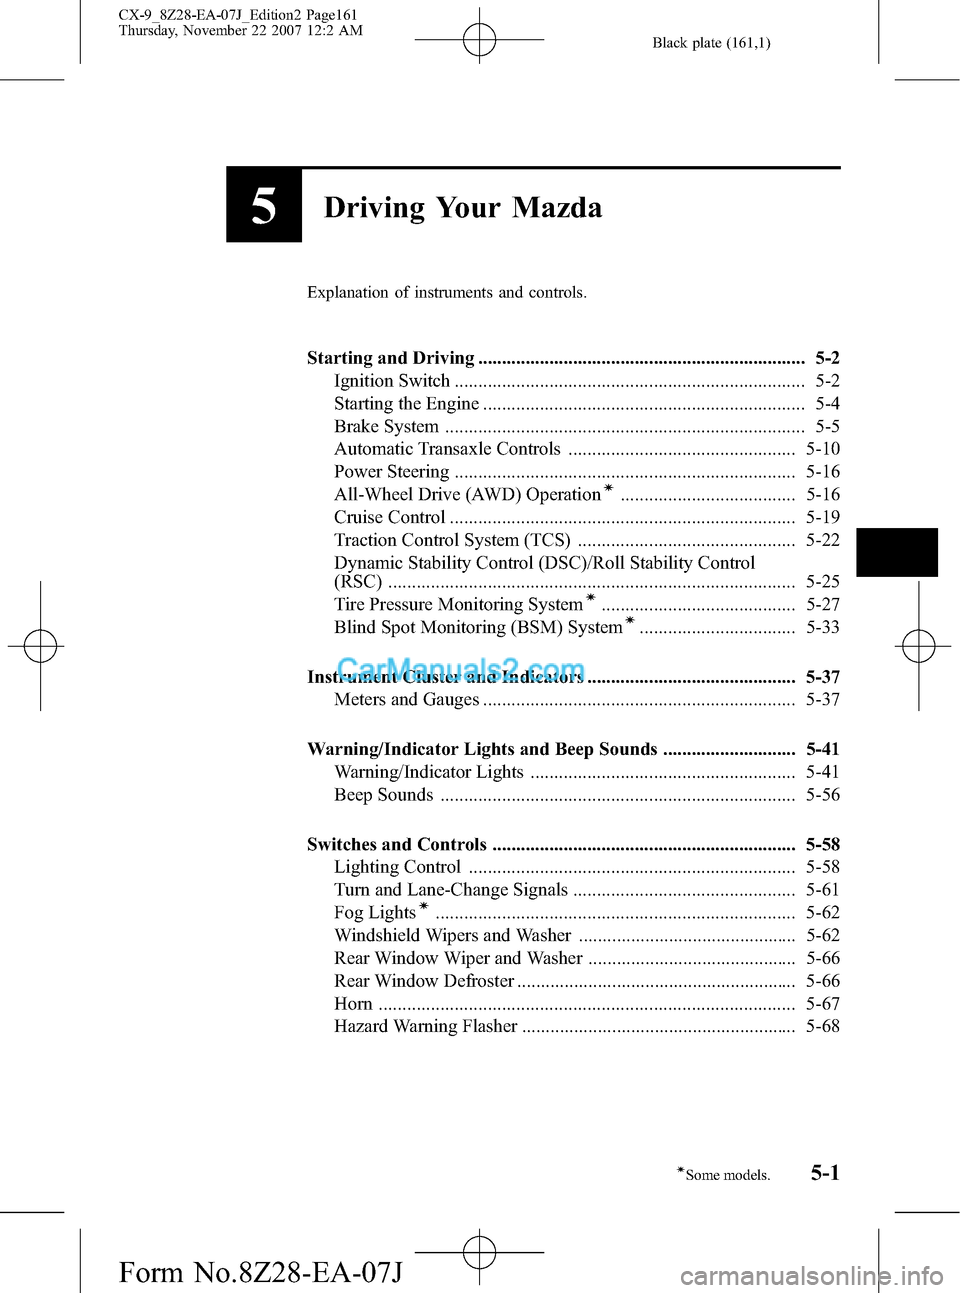 MAZDA MODEL CX-9 2008  Owners Manual (in English) Black plate (161,1)
5Driving Your Mazda
Explanation of instruments and controls.
Starting and Driving ..................................................................... 5-2
Ignition Switch ........